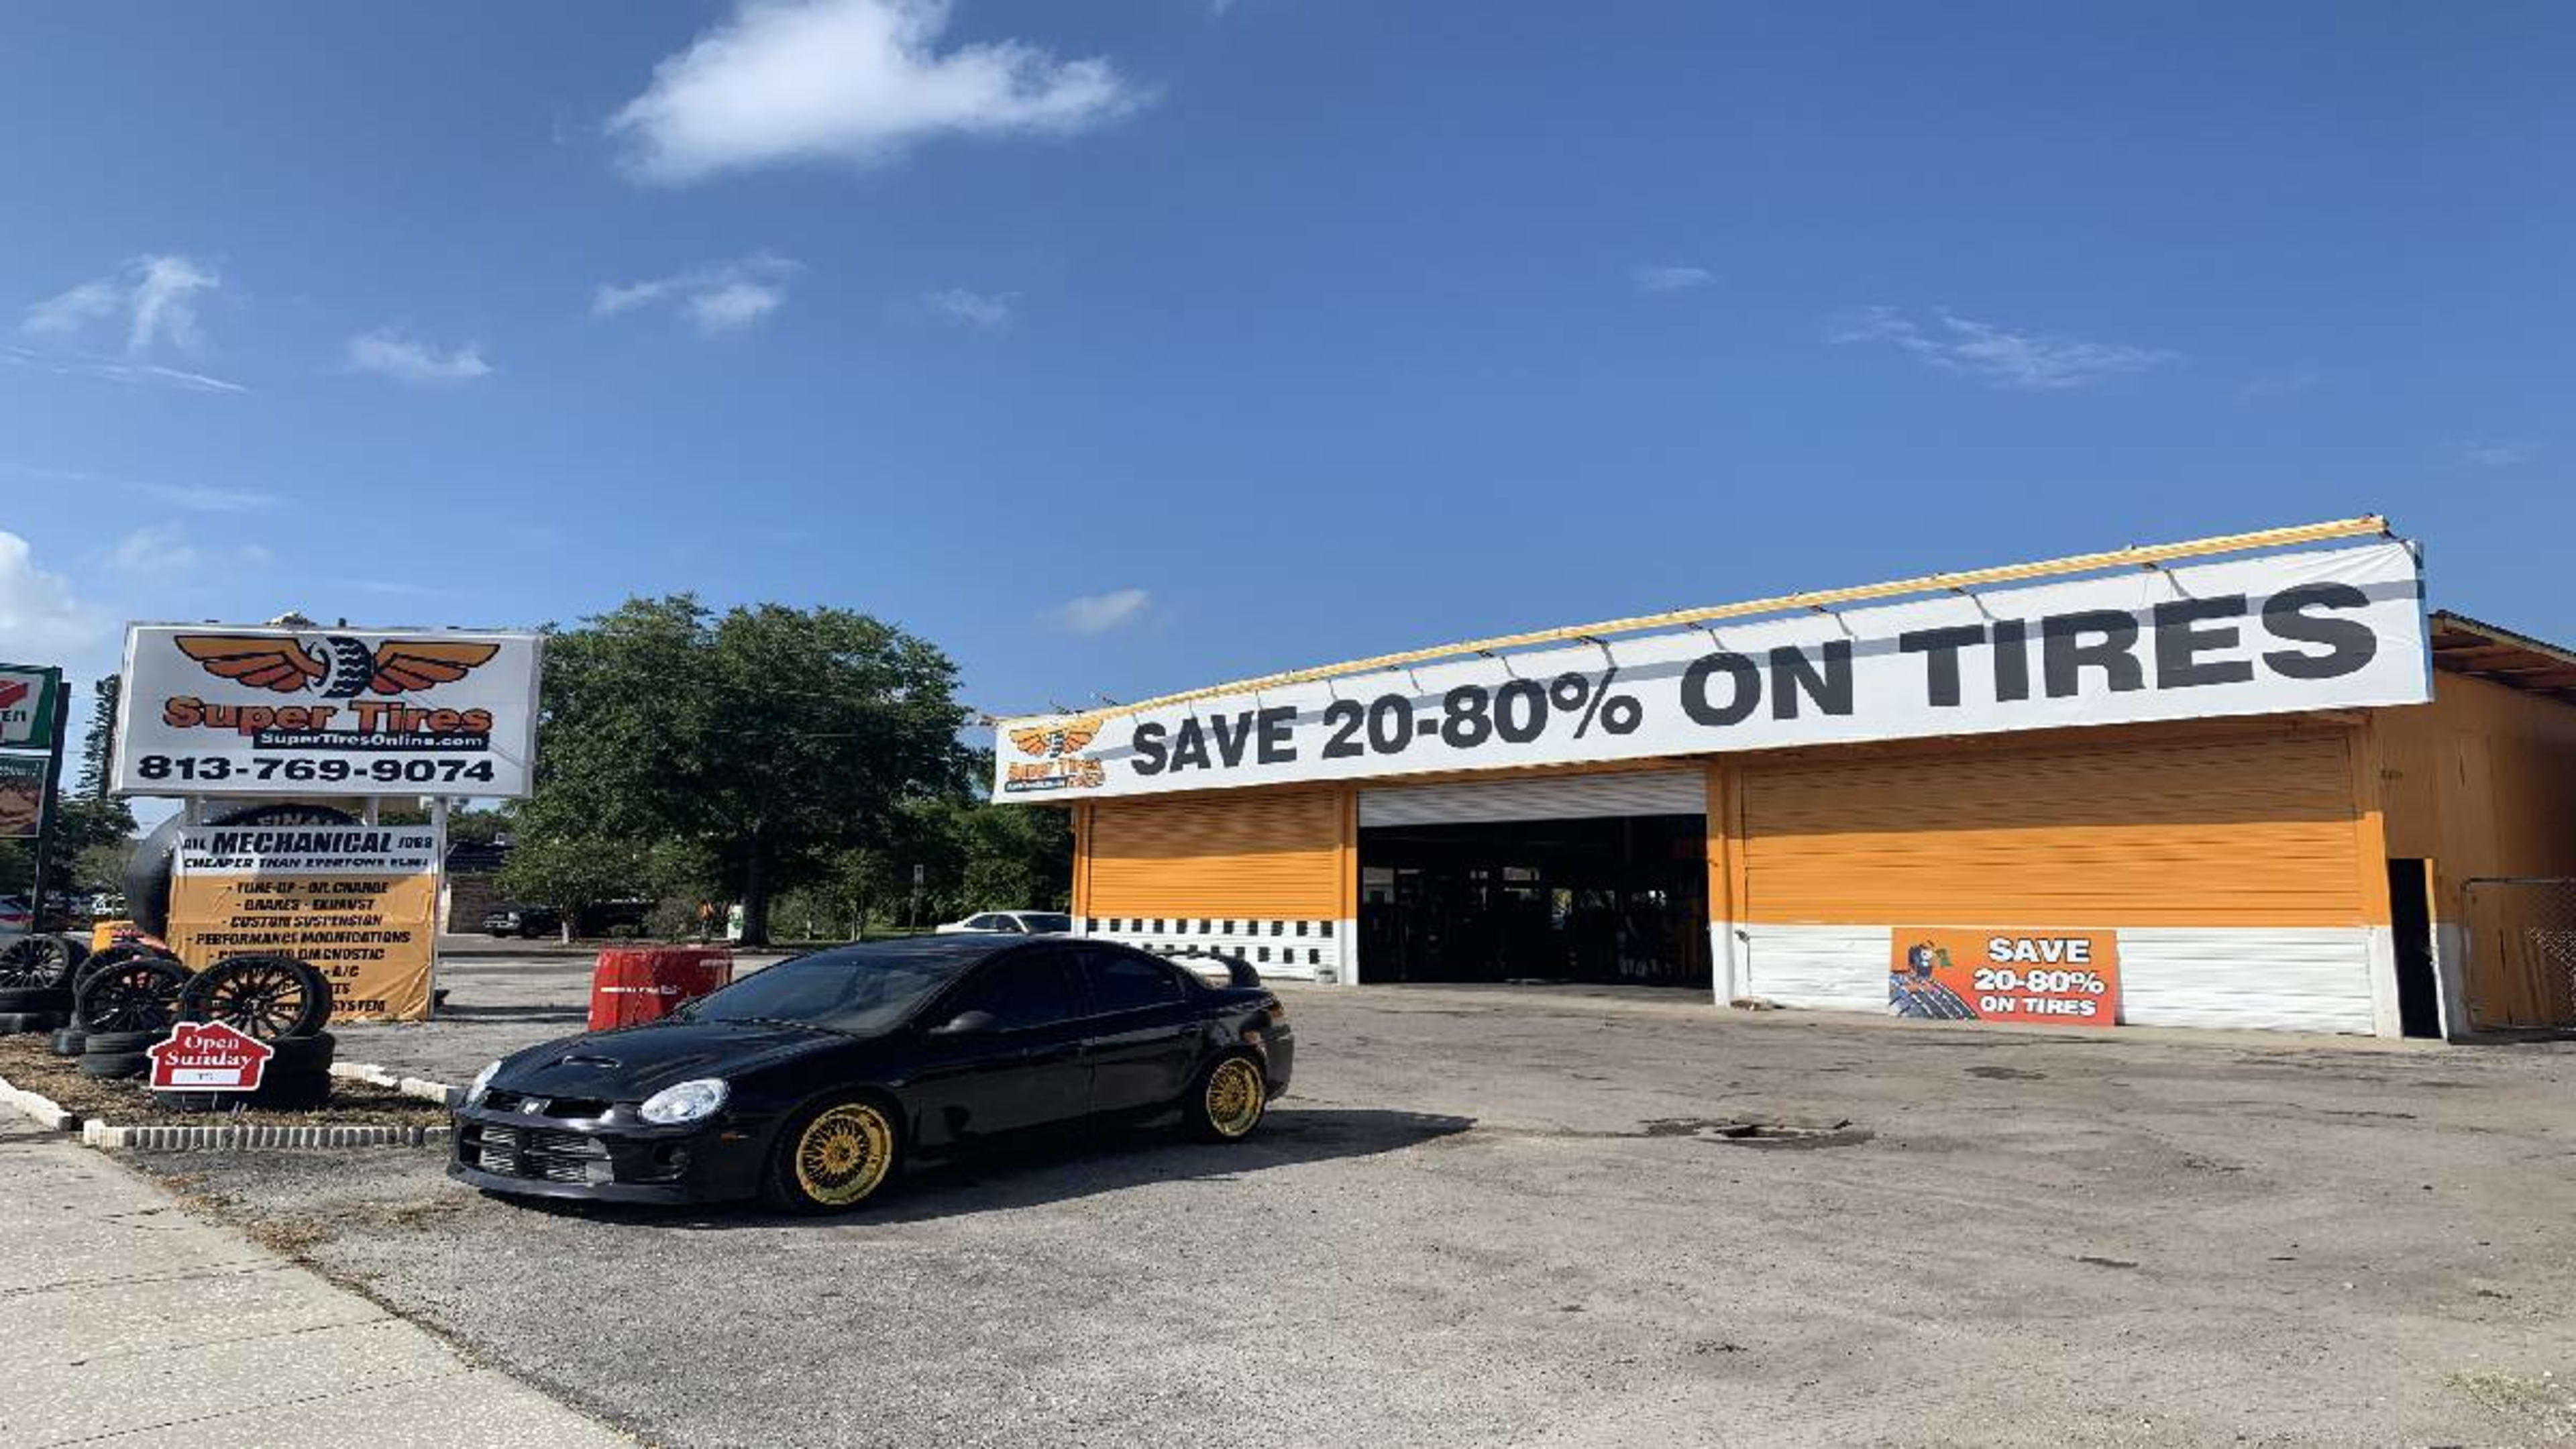 Today's Deals, Savings on Wheels, Tires, and Suspension